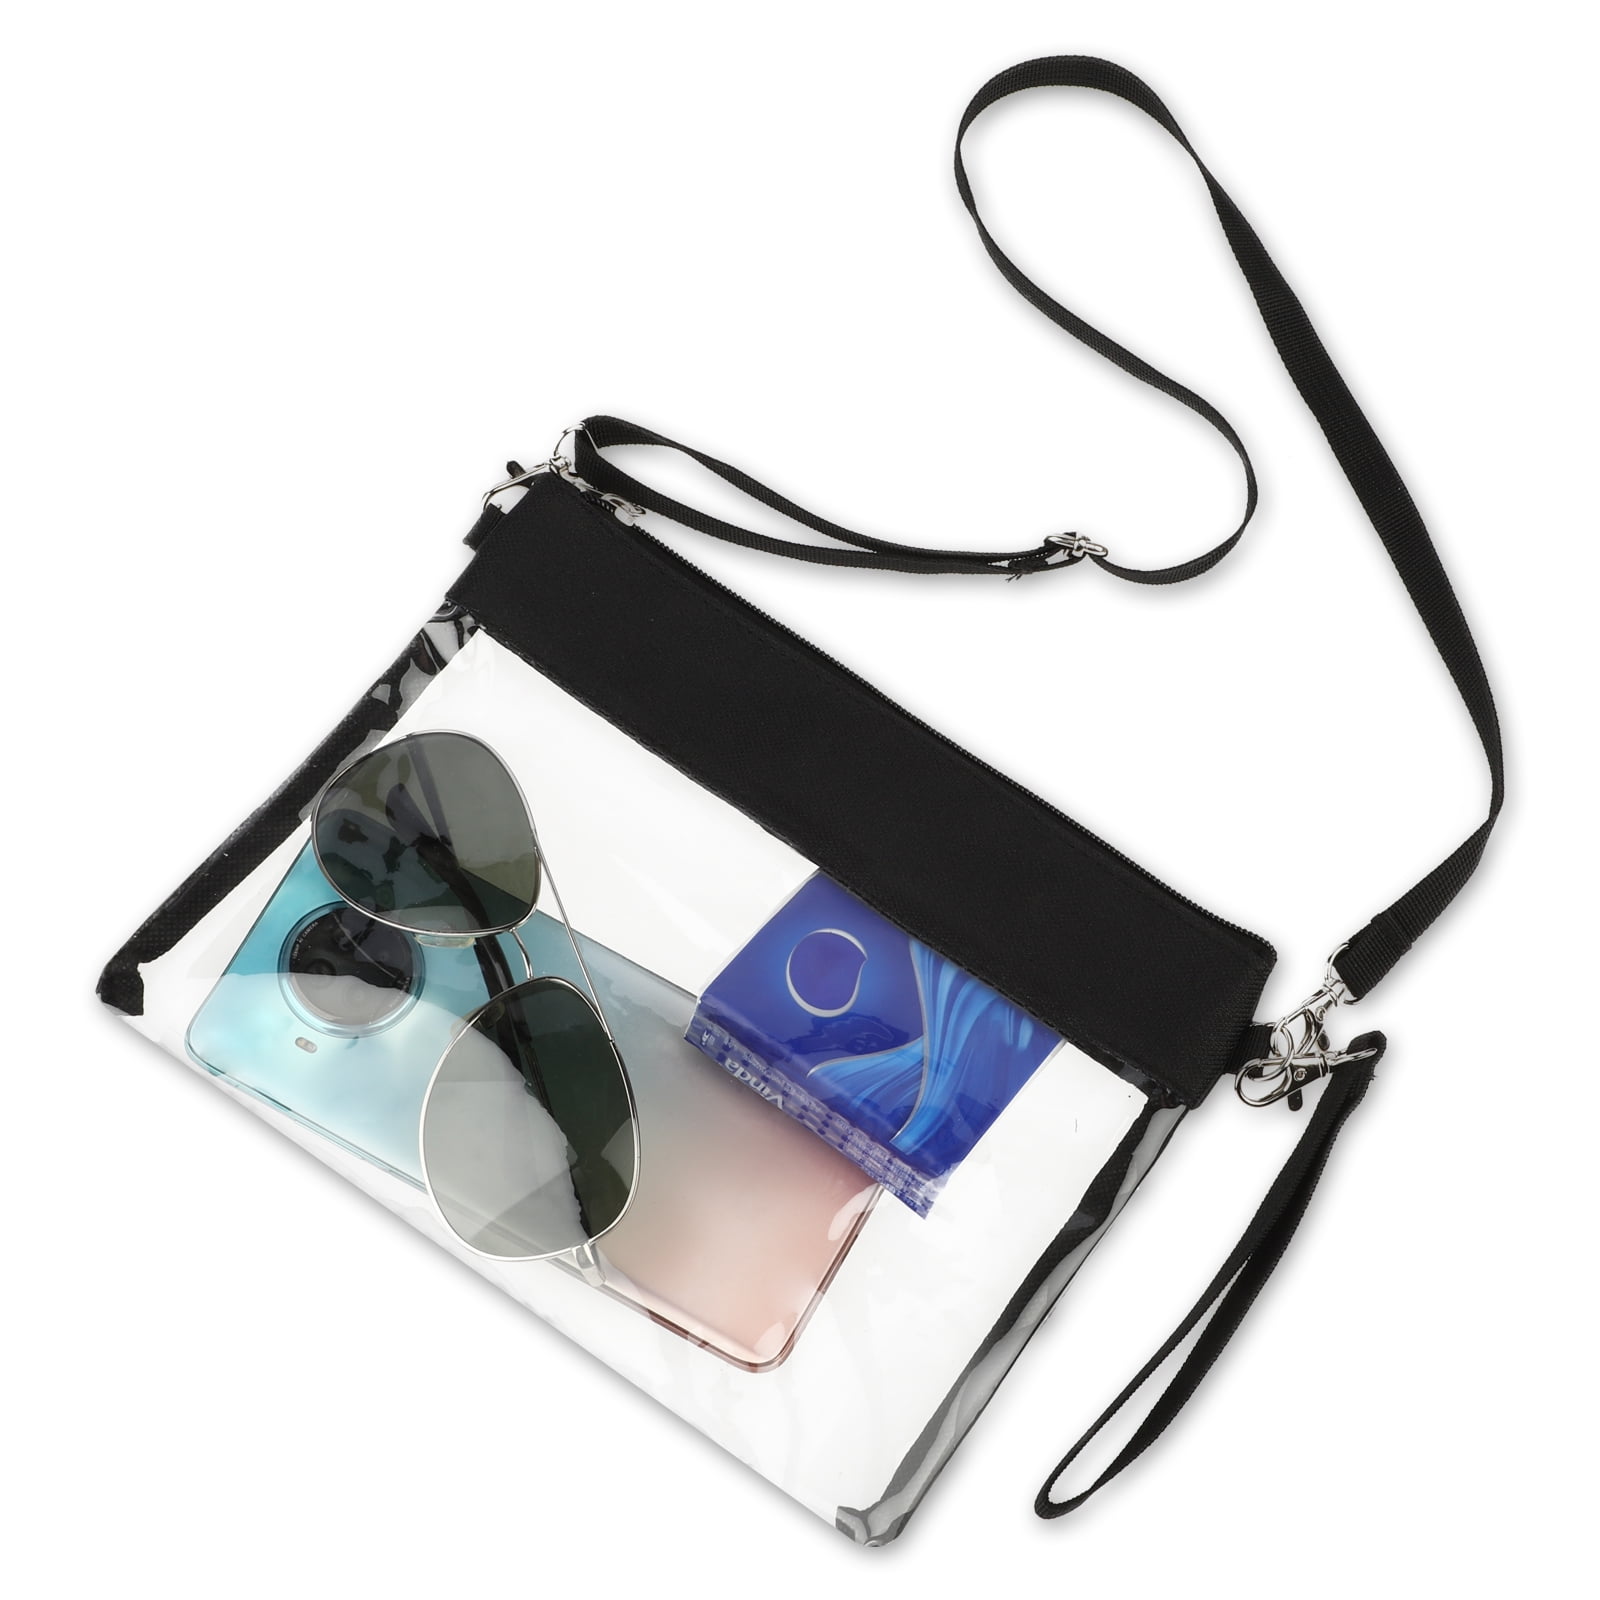 Bolley Joss Clear Purse Crossbody Women Girls Stadium Approved Holographic Shoulder Bag with Adjustable Strap 